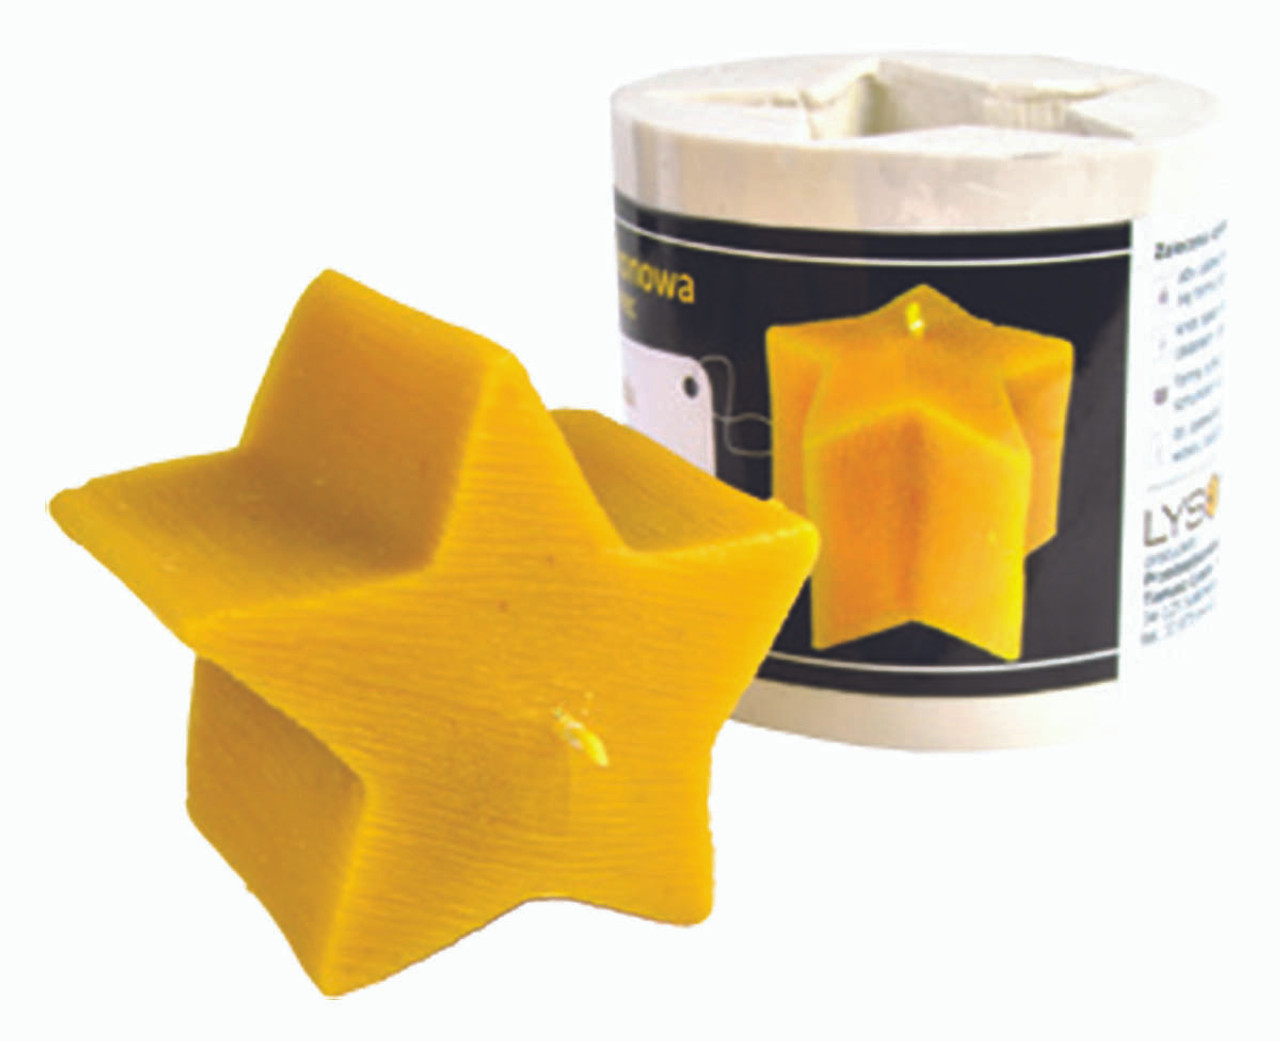 8 POINT STAR TAPER CANDLE MOLD, 2.5 x 3 5/8 x 12.5 (2 lb 4 oz)